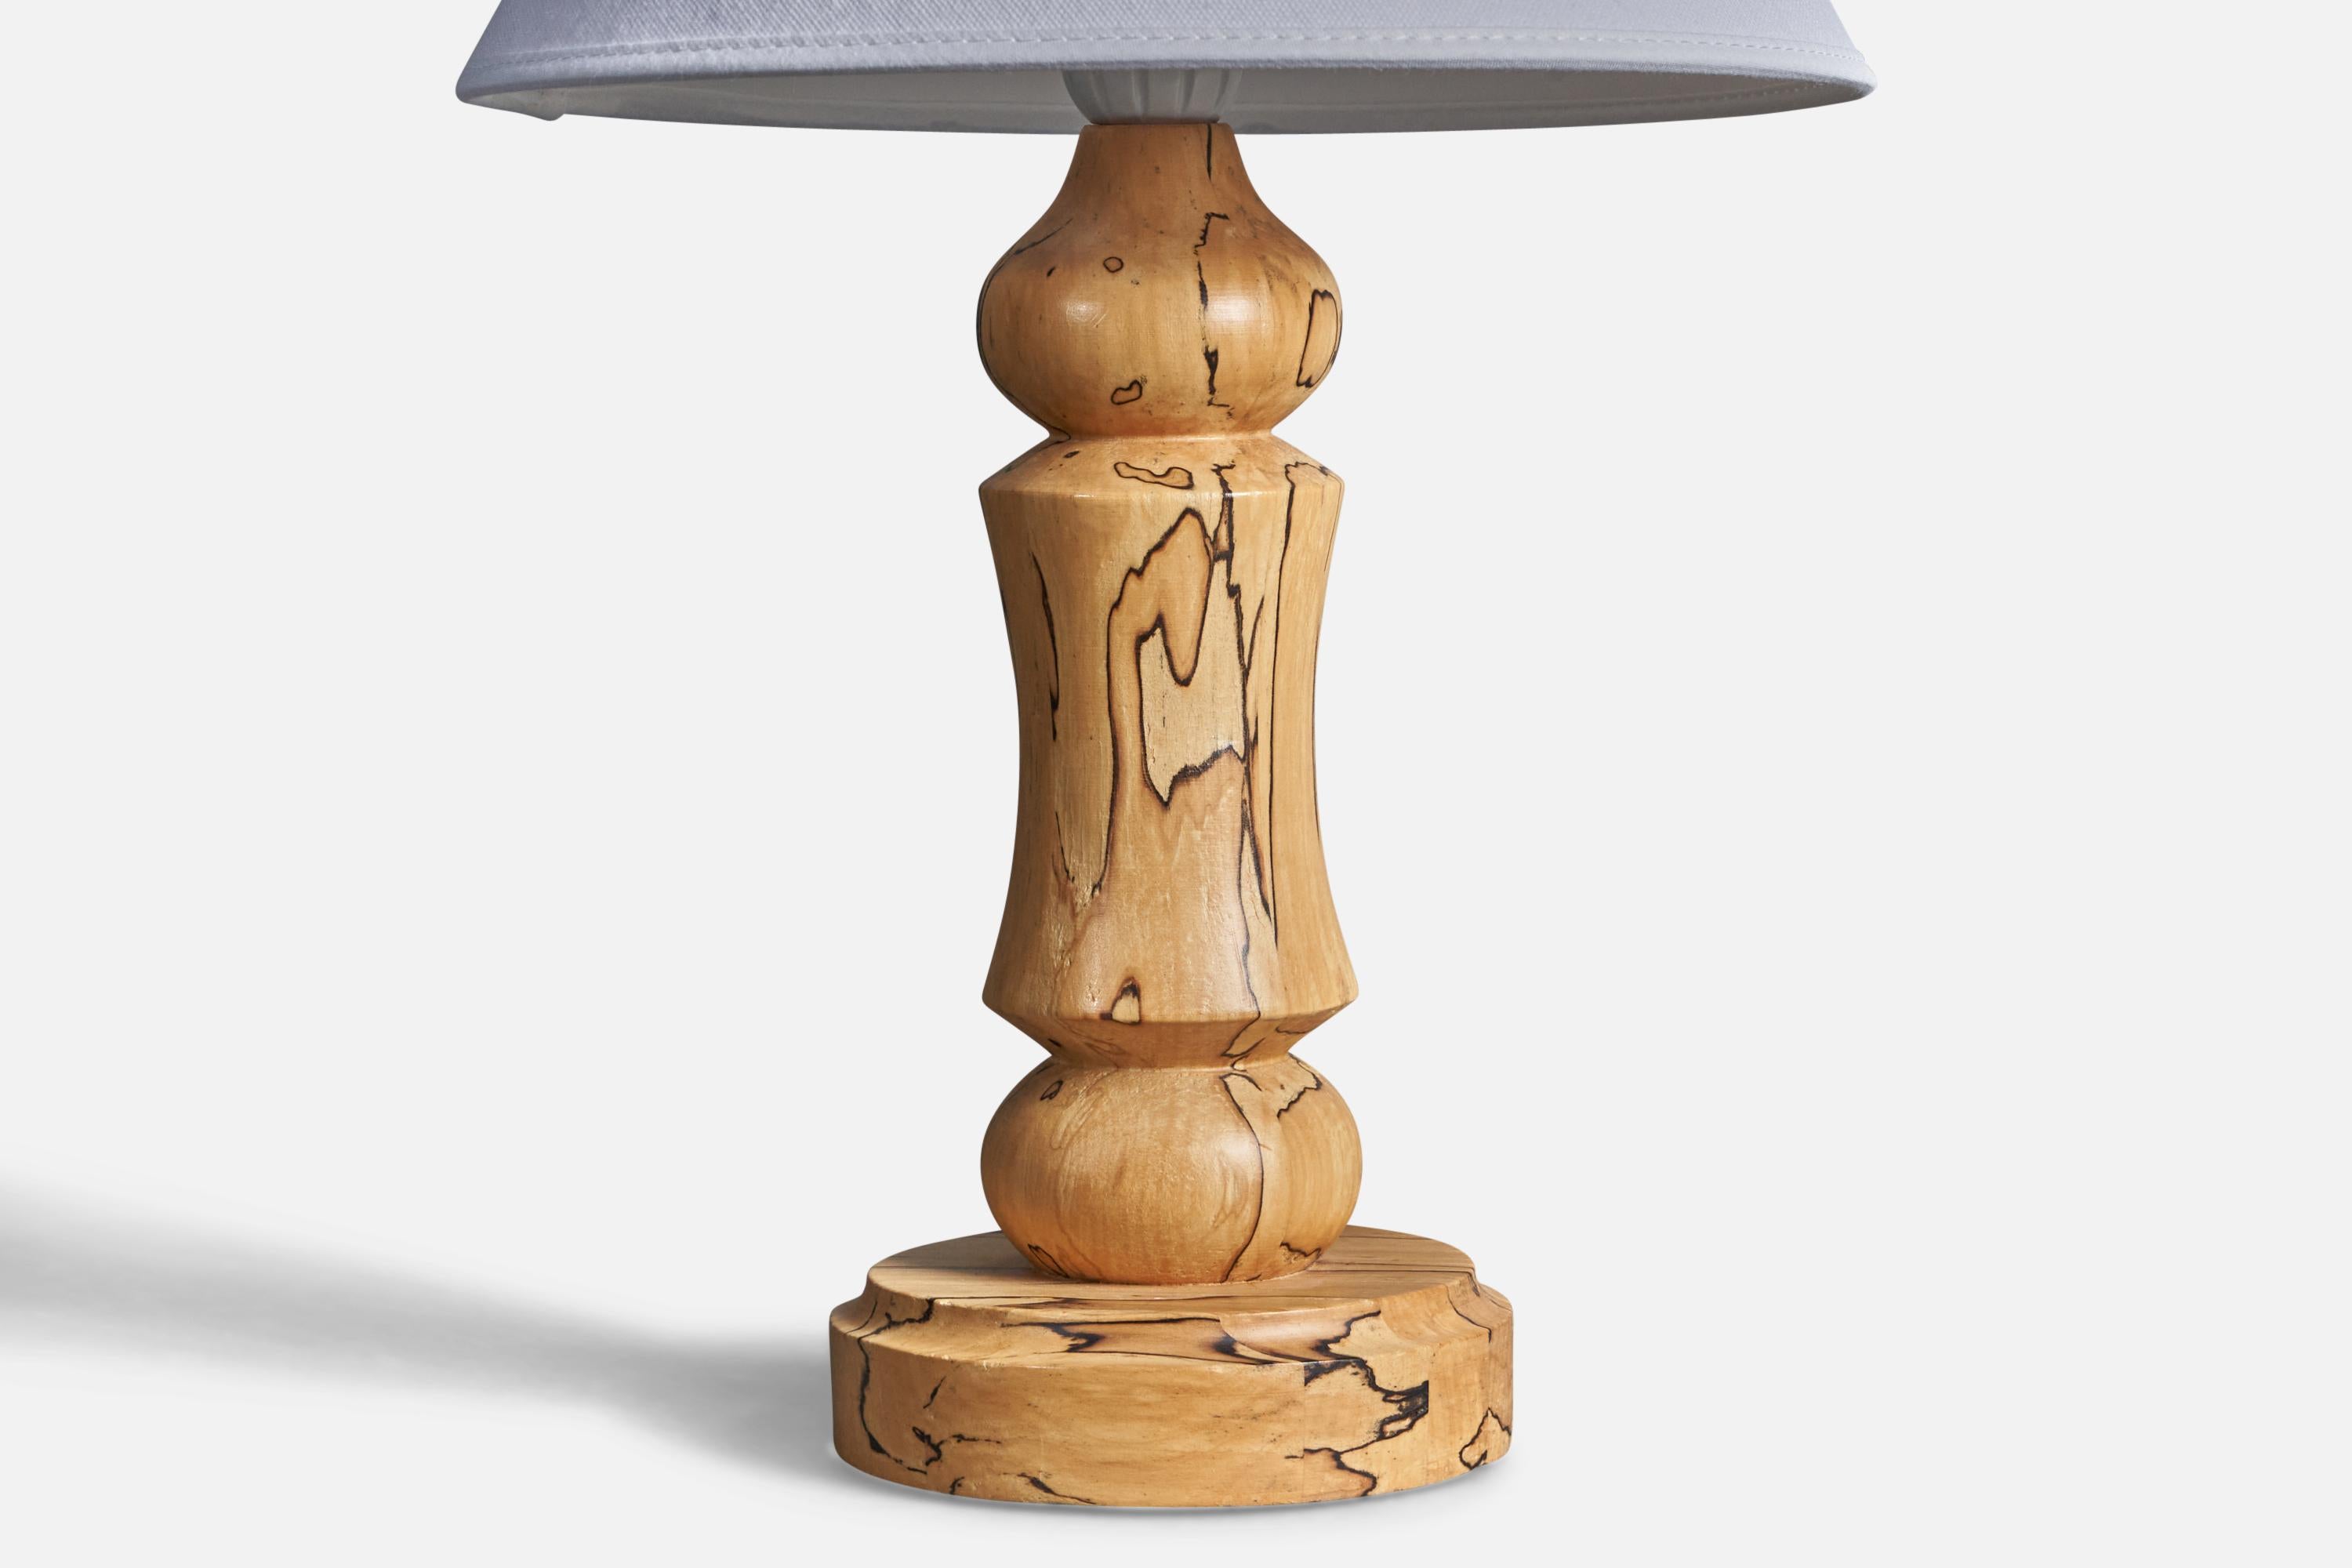 A Swedish craft table lamp. In turned solid Masur birch, Sweden, 1970s.

Condition: Good

Wear is consistent with age and use.

Dimensions of Lamp (inches): 11.75” H x 4.75” Diameter

Dimensions of Shade (inches): 4.5” Top Diameter x 10” Bottom